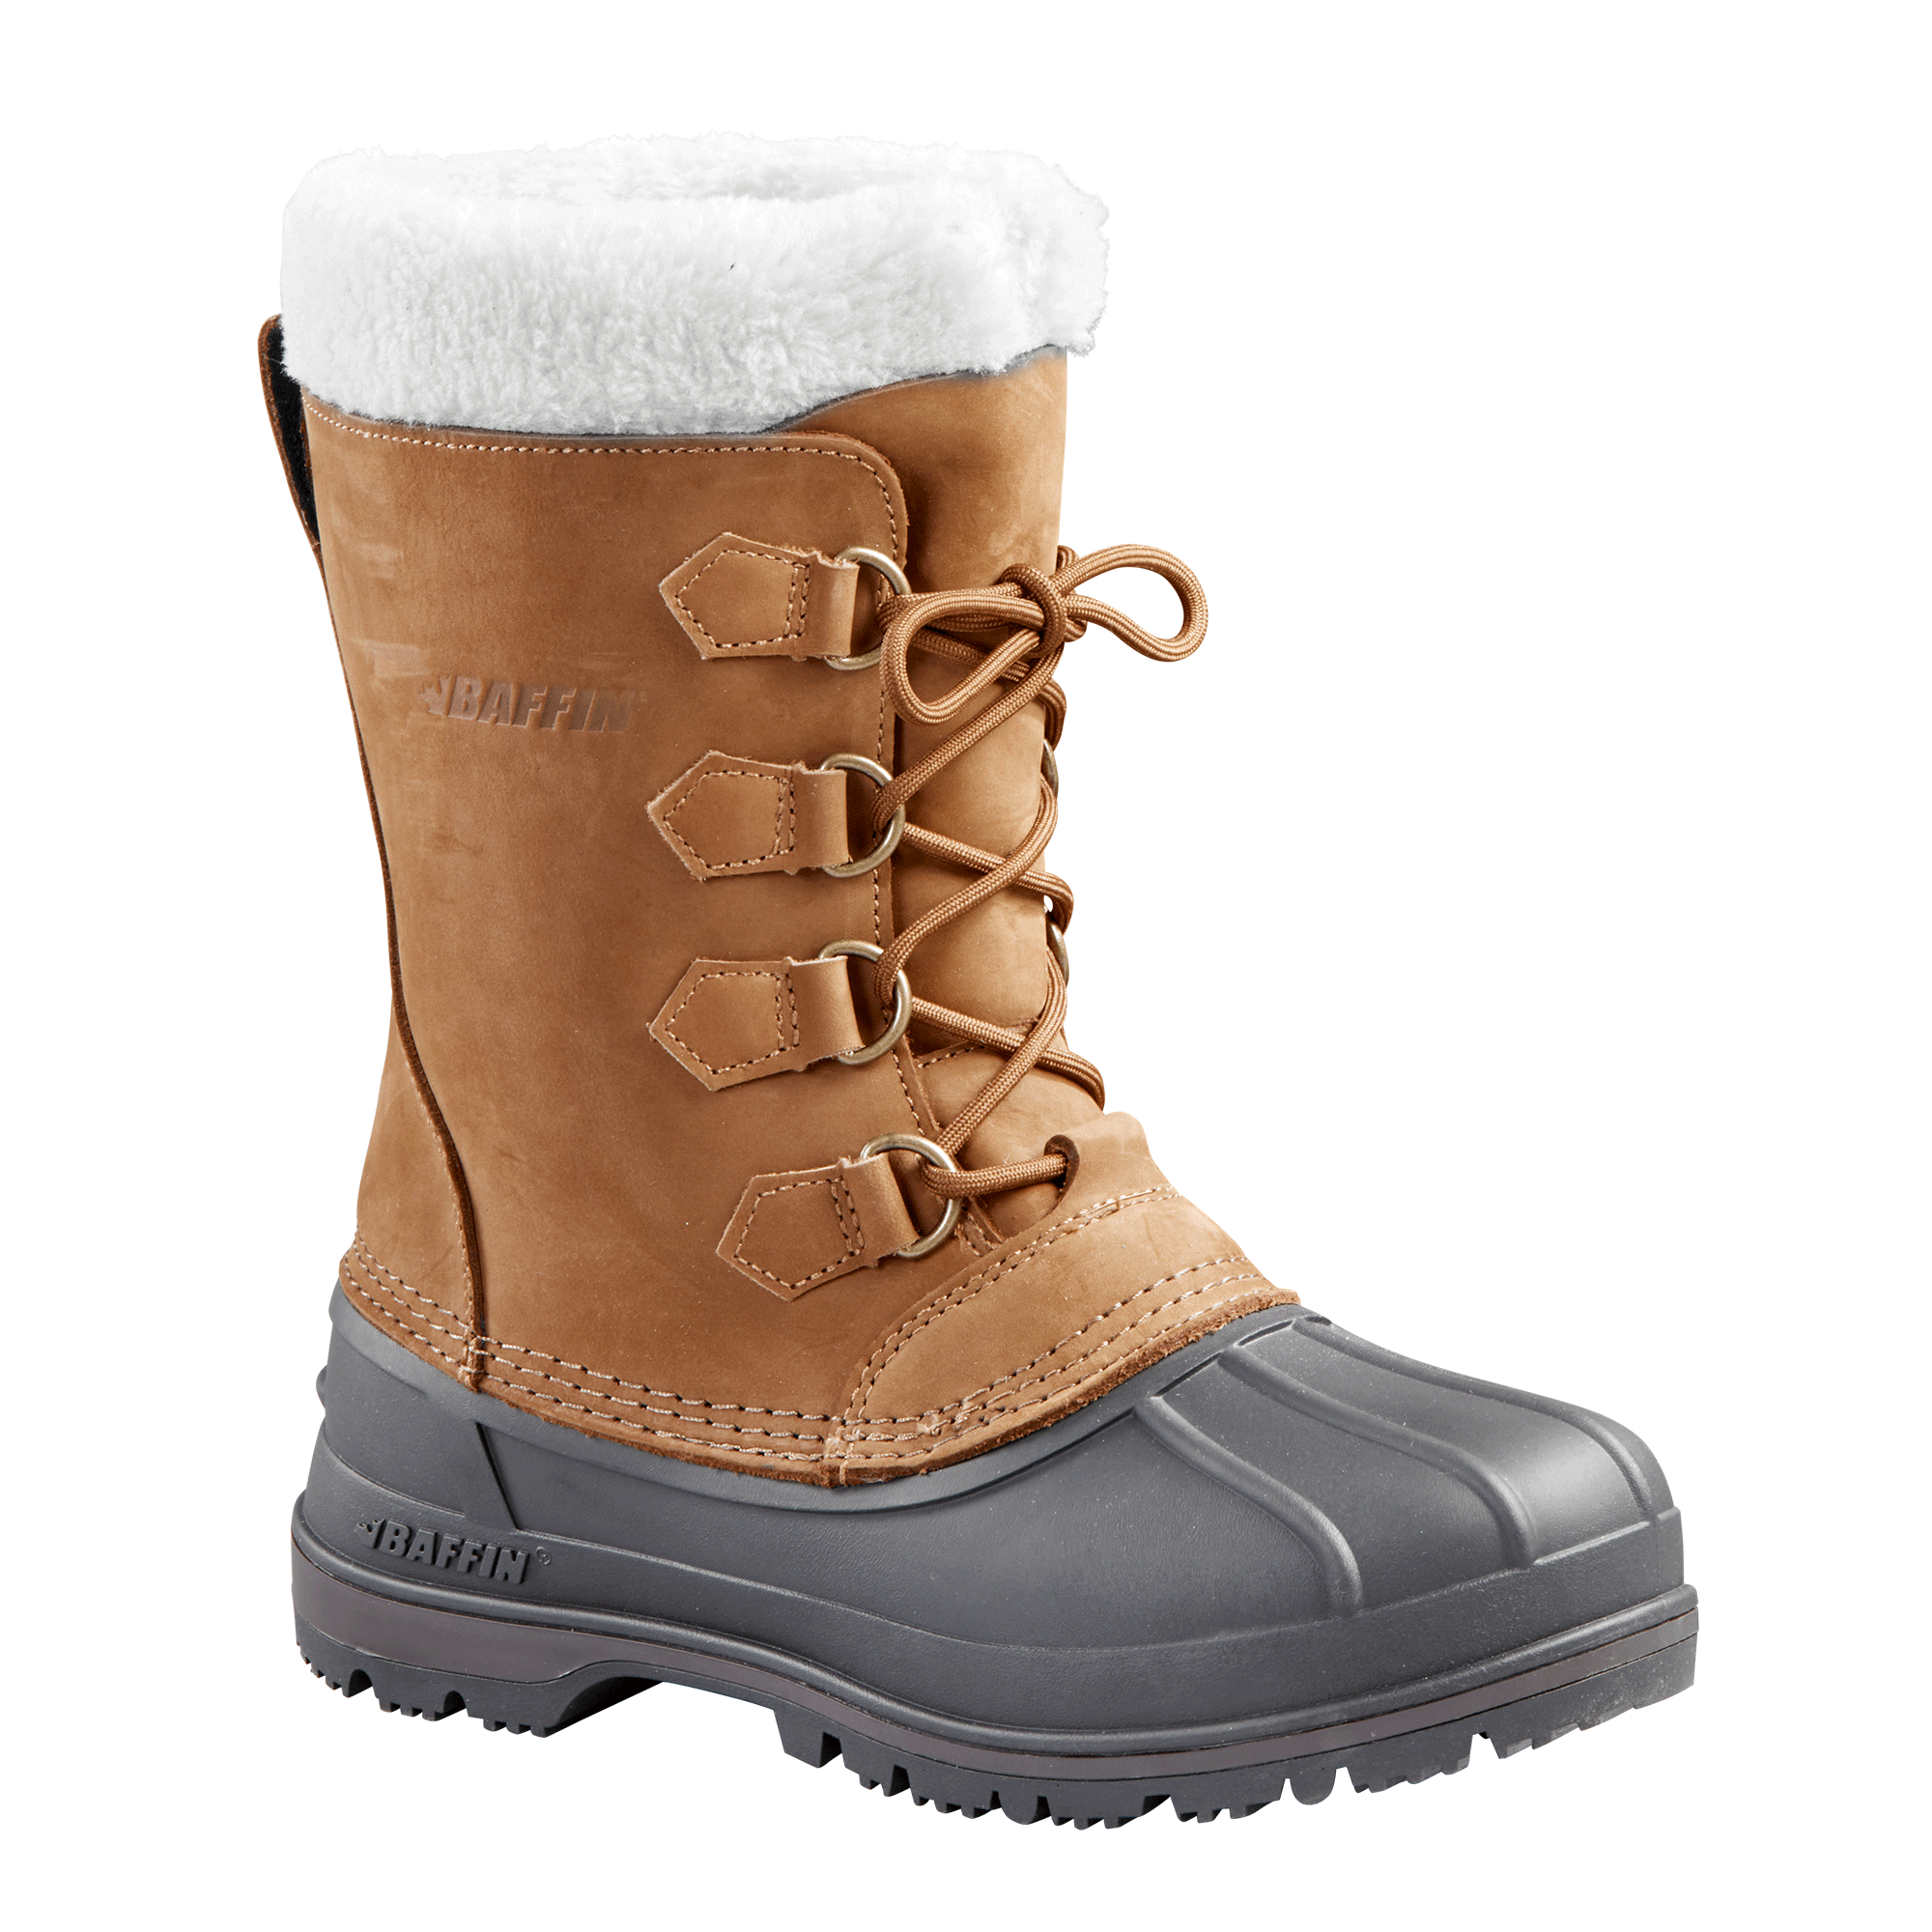 Oh Hey, Sorel! Time For Cute Winter Boots (We're Trying 5 Pairs